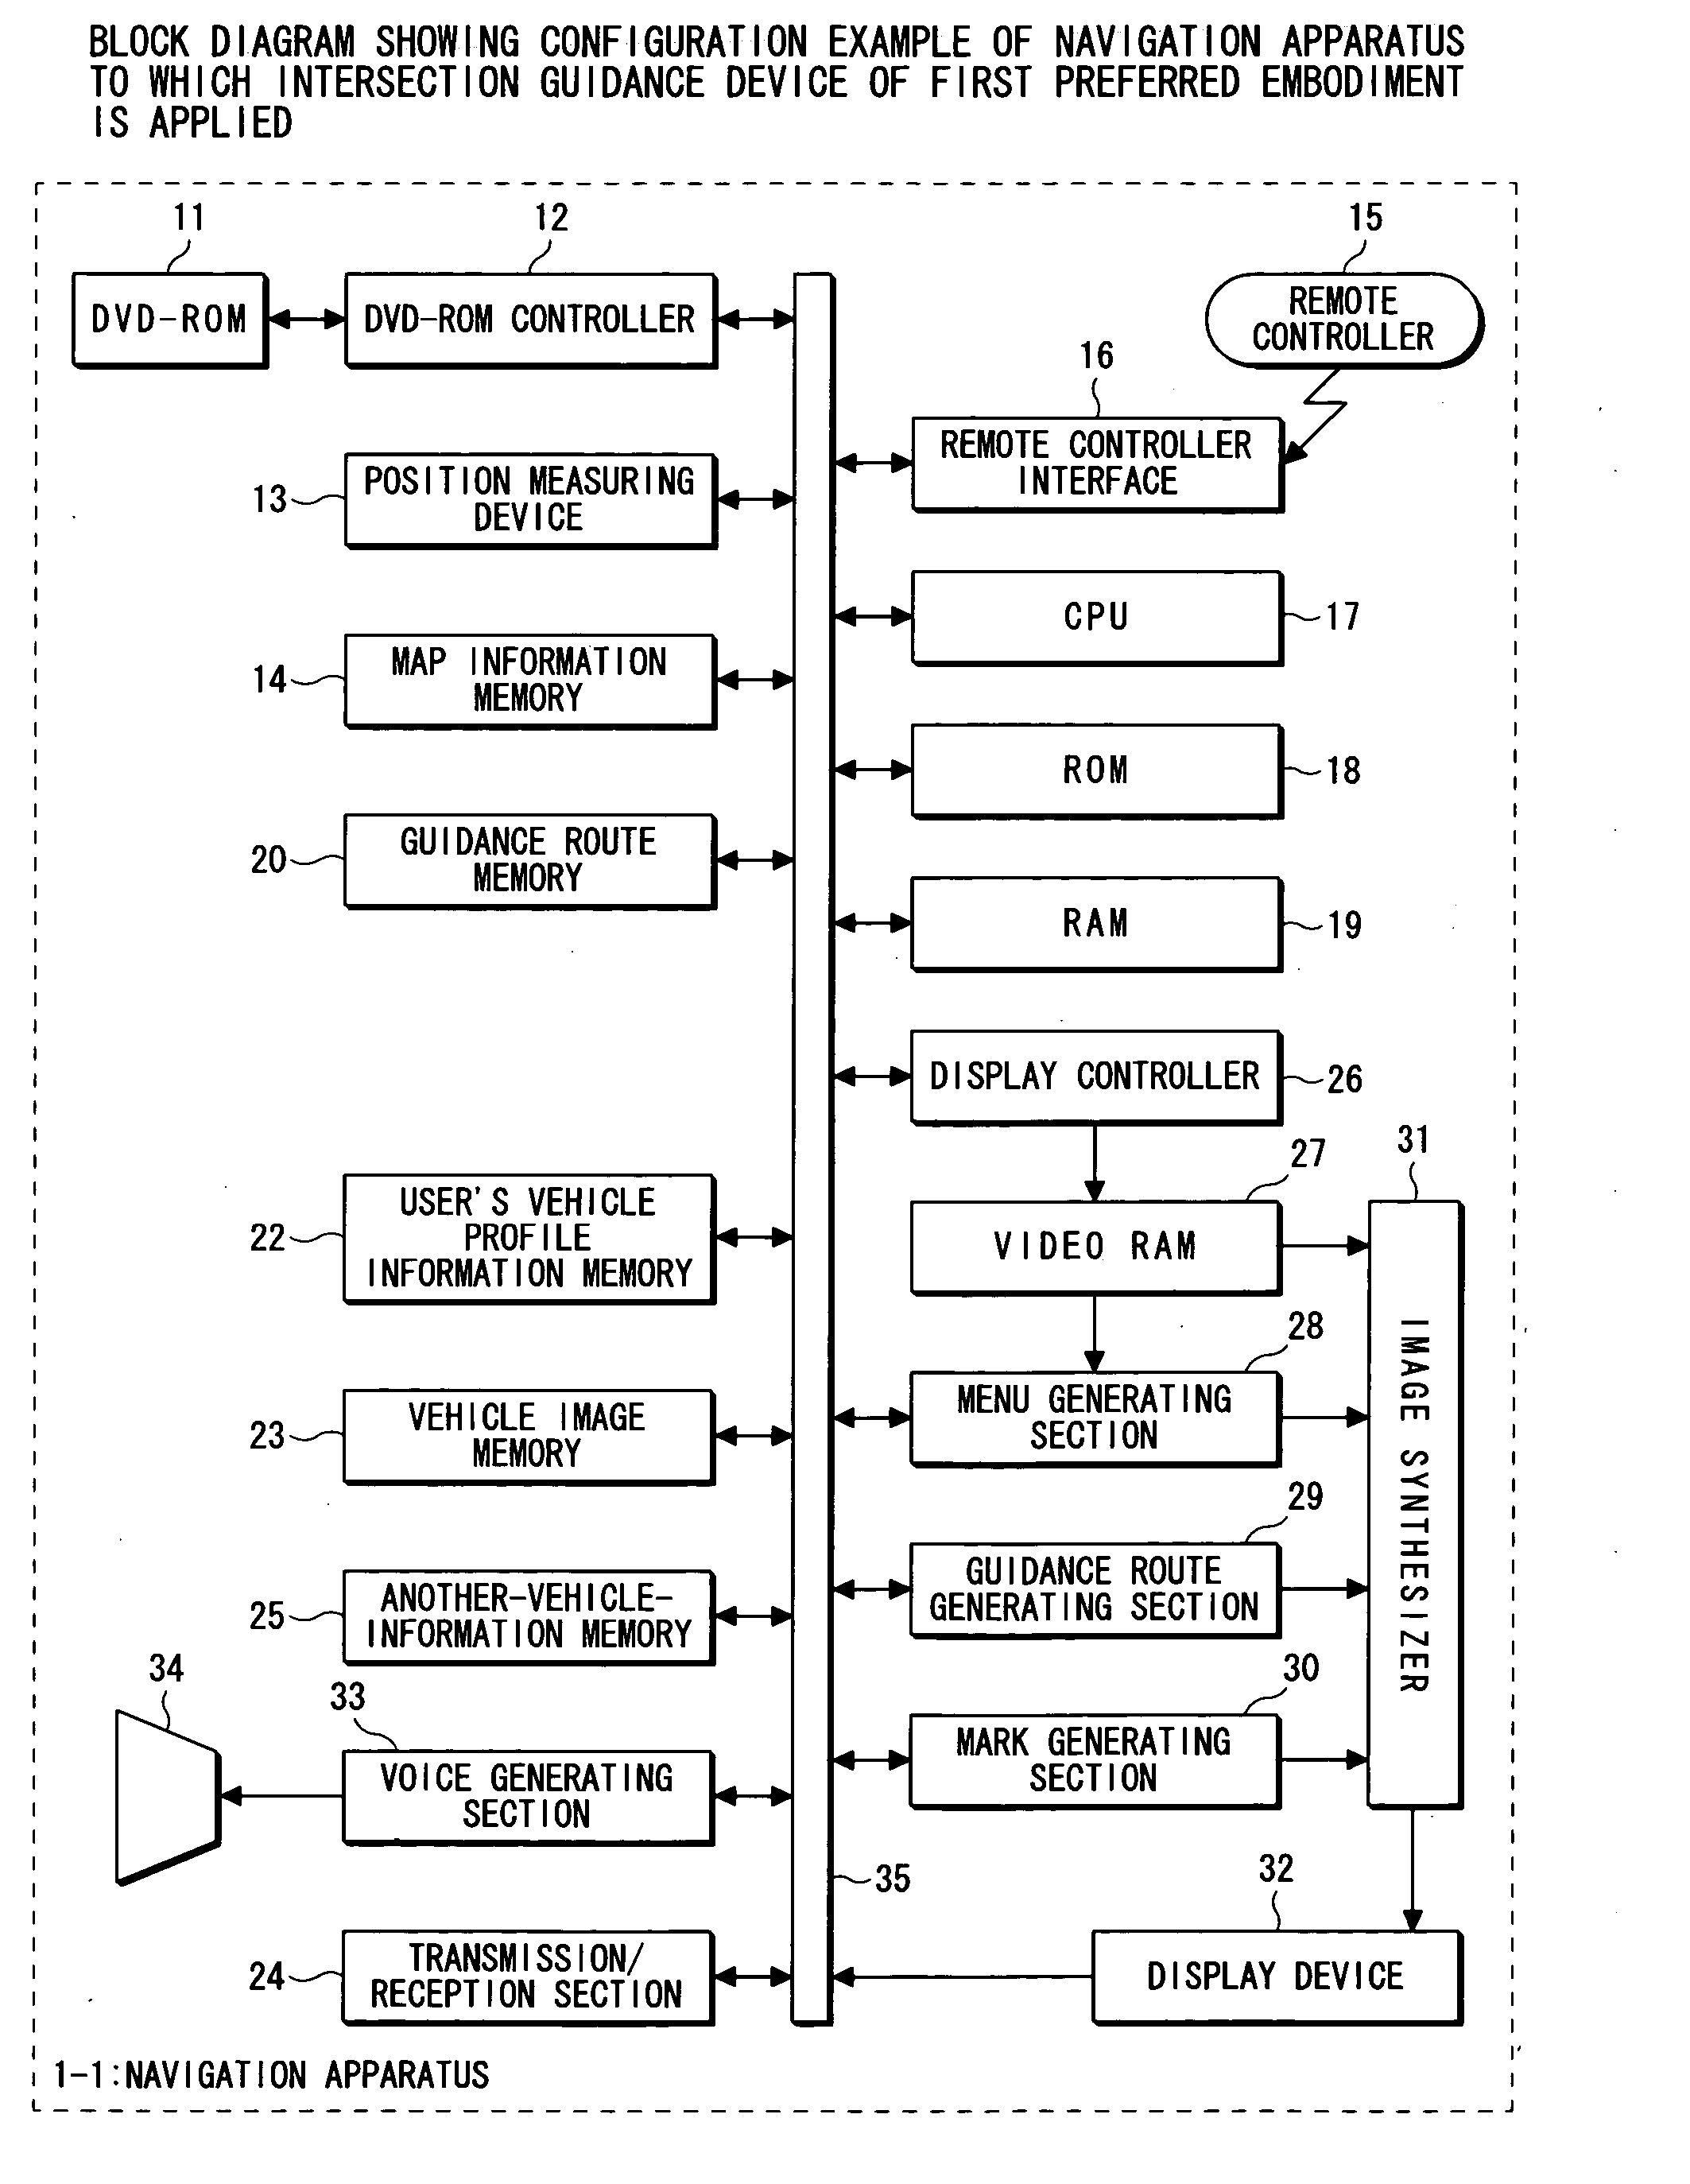 Navigation apparatus and intersection guidance method